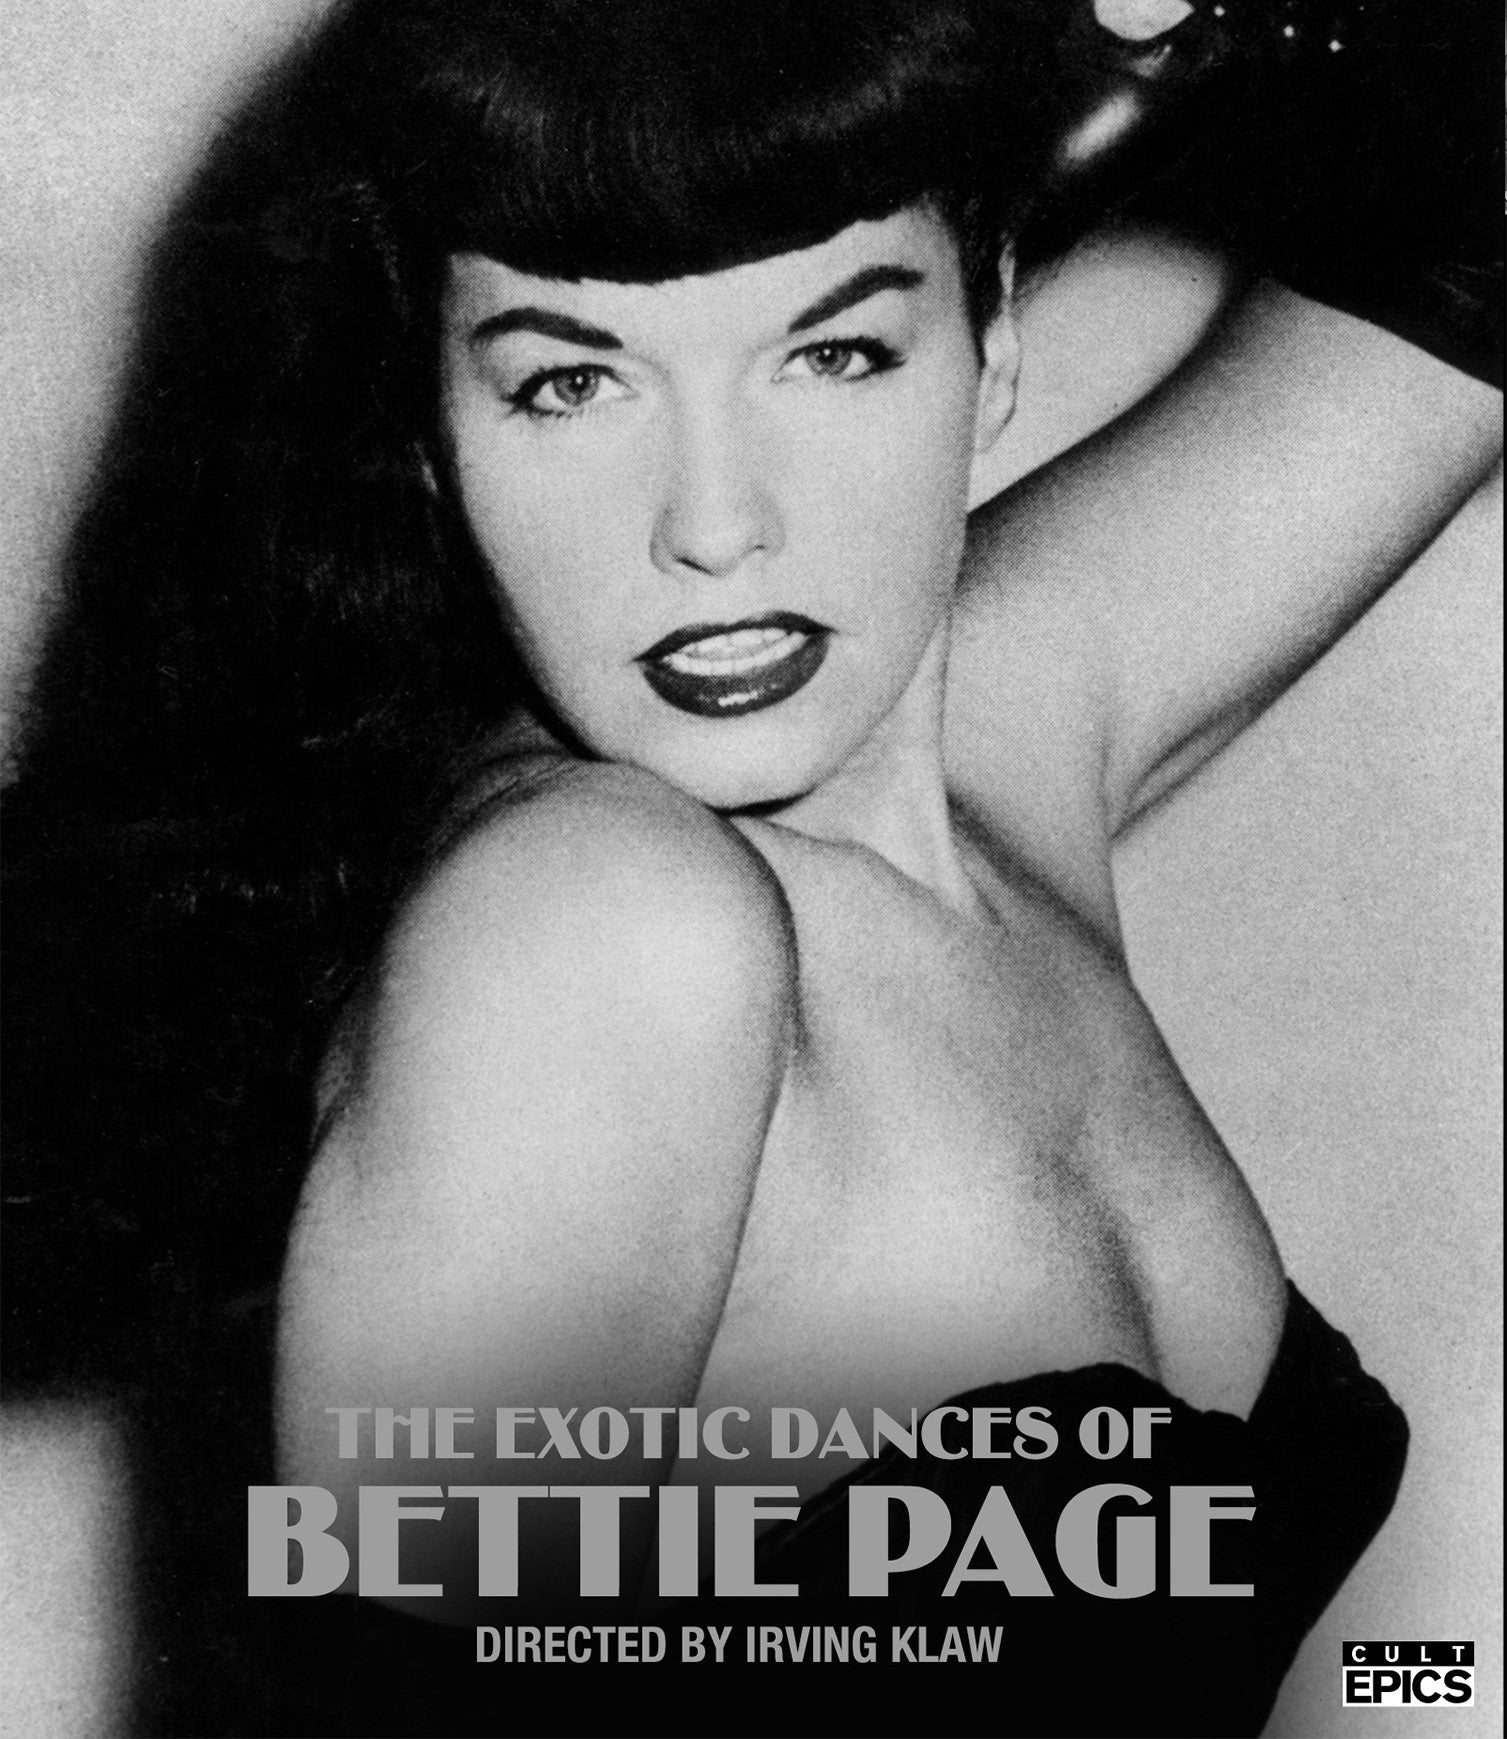 THE EXOTIC DANCES OF BETTIE PAGE BLU-RAY